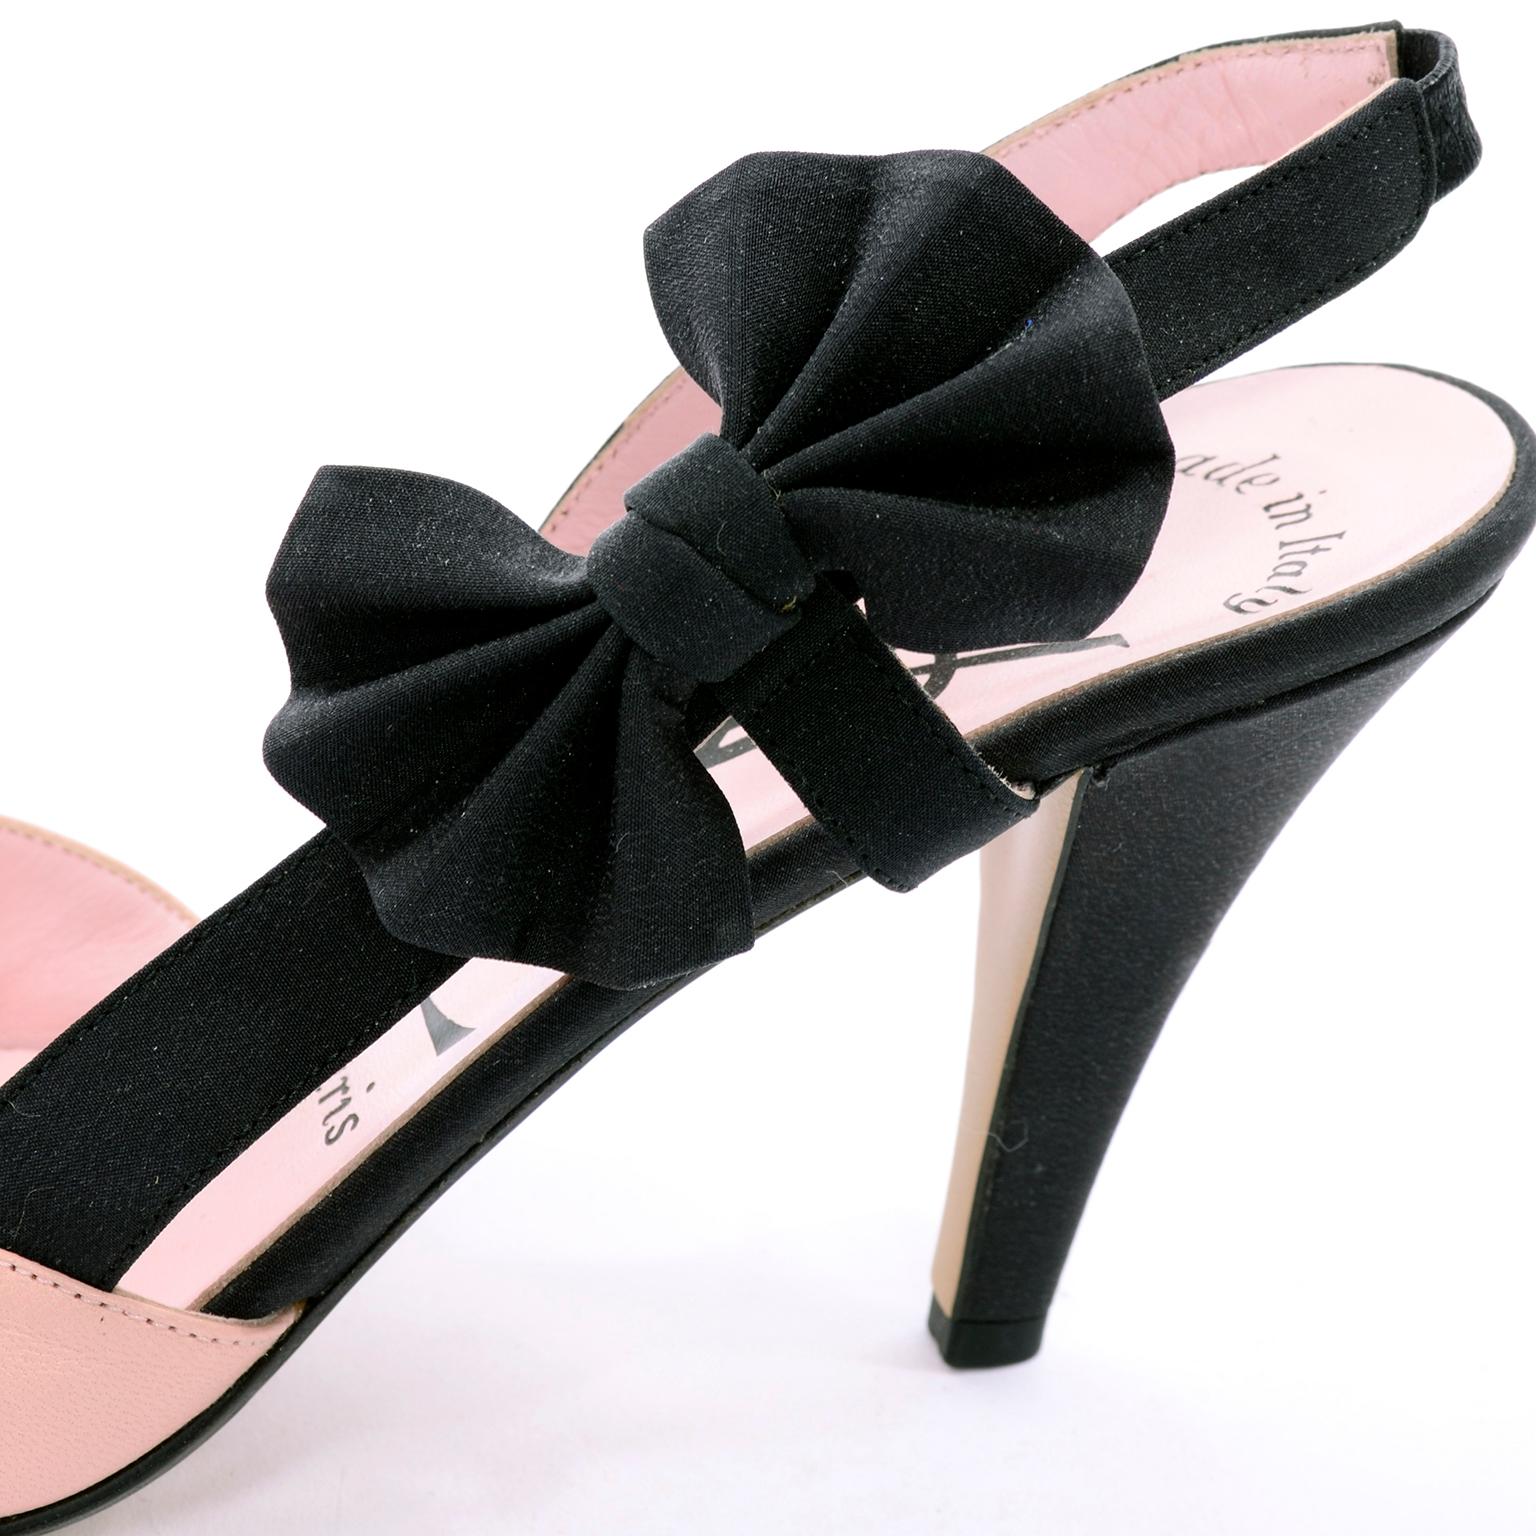 Women's Pink Slingback Peep Toe YSL Shoes With Black Bows & 3.75 Inch Heels Size 7.5N